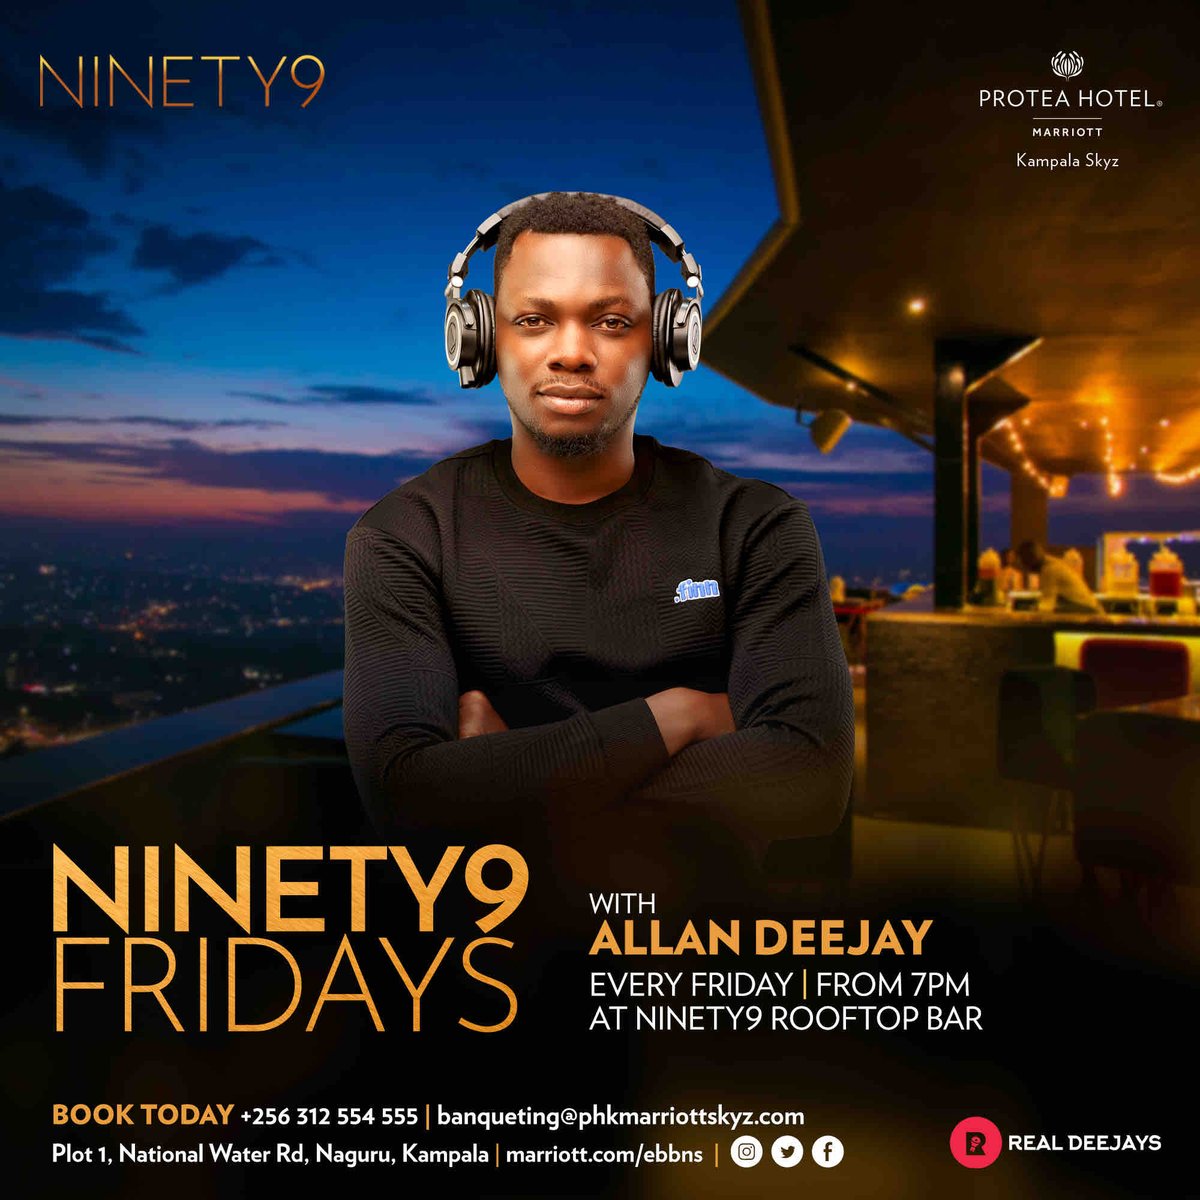 Start the weekend on the right note at Ninety9 Fridays curated at the breathtaking @SkyzNinety9! the vibes are off the charts with amazing drinks, a tasty bar menu, dope tunes and an incredible view!Come thru Skyz Fam! #ninety9fridays ##proteaskyz